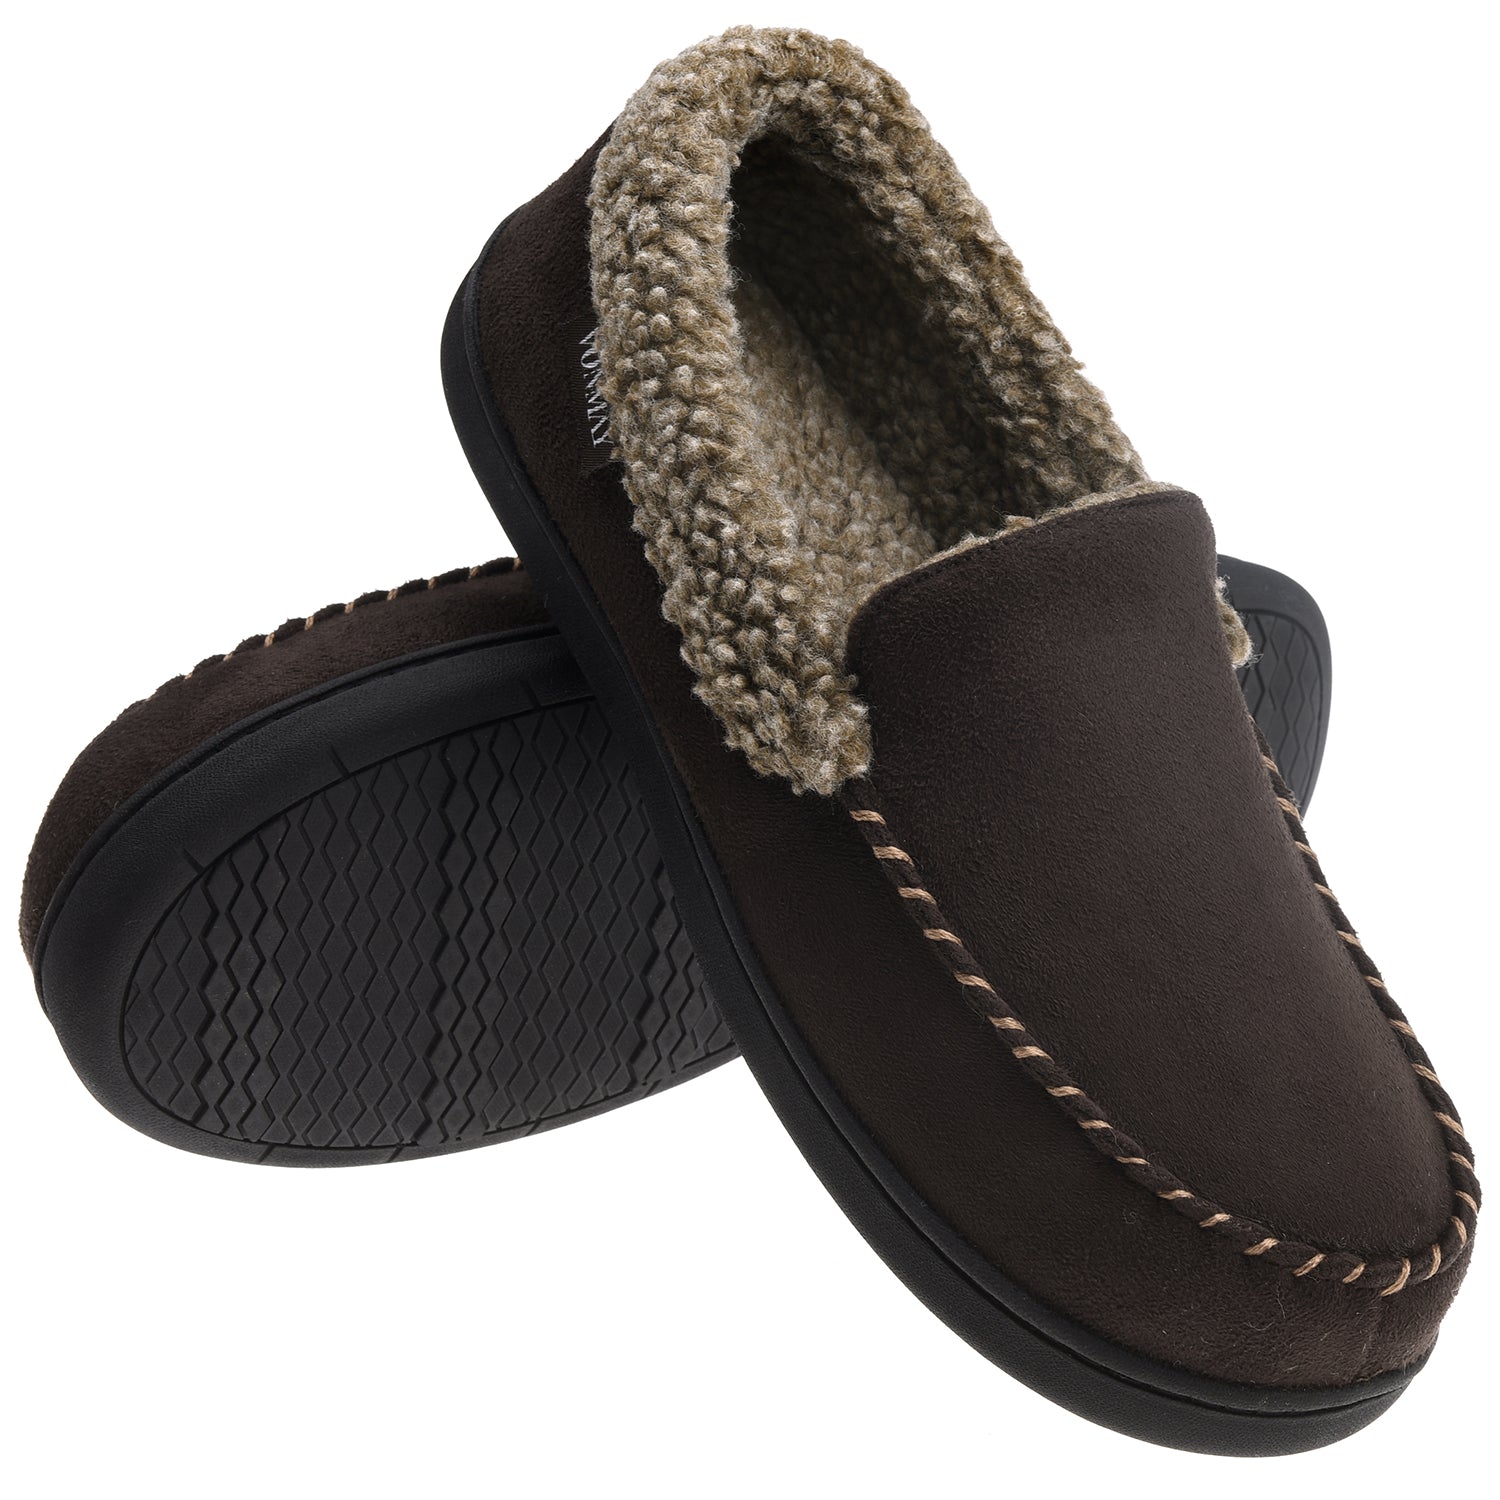 mens moccasin house shoes